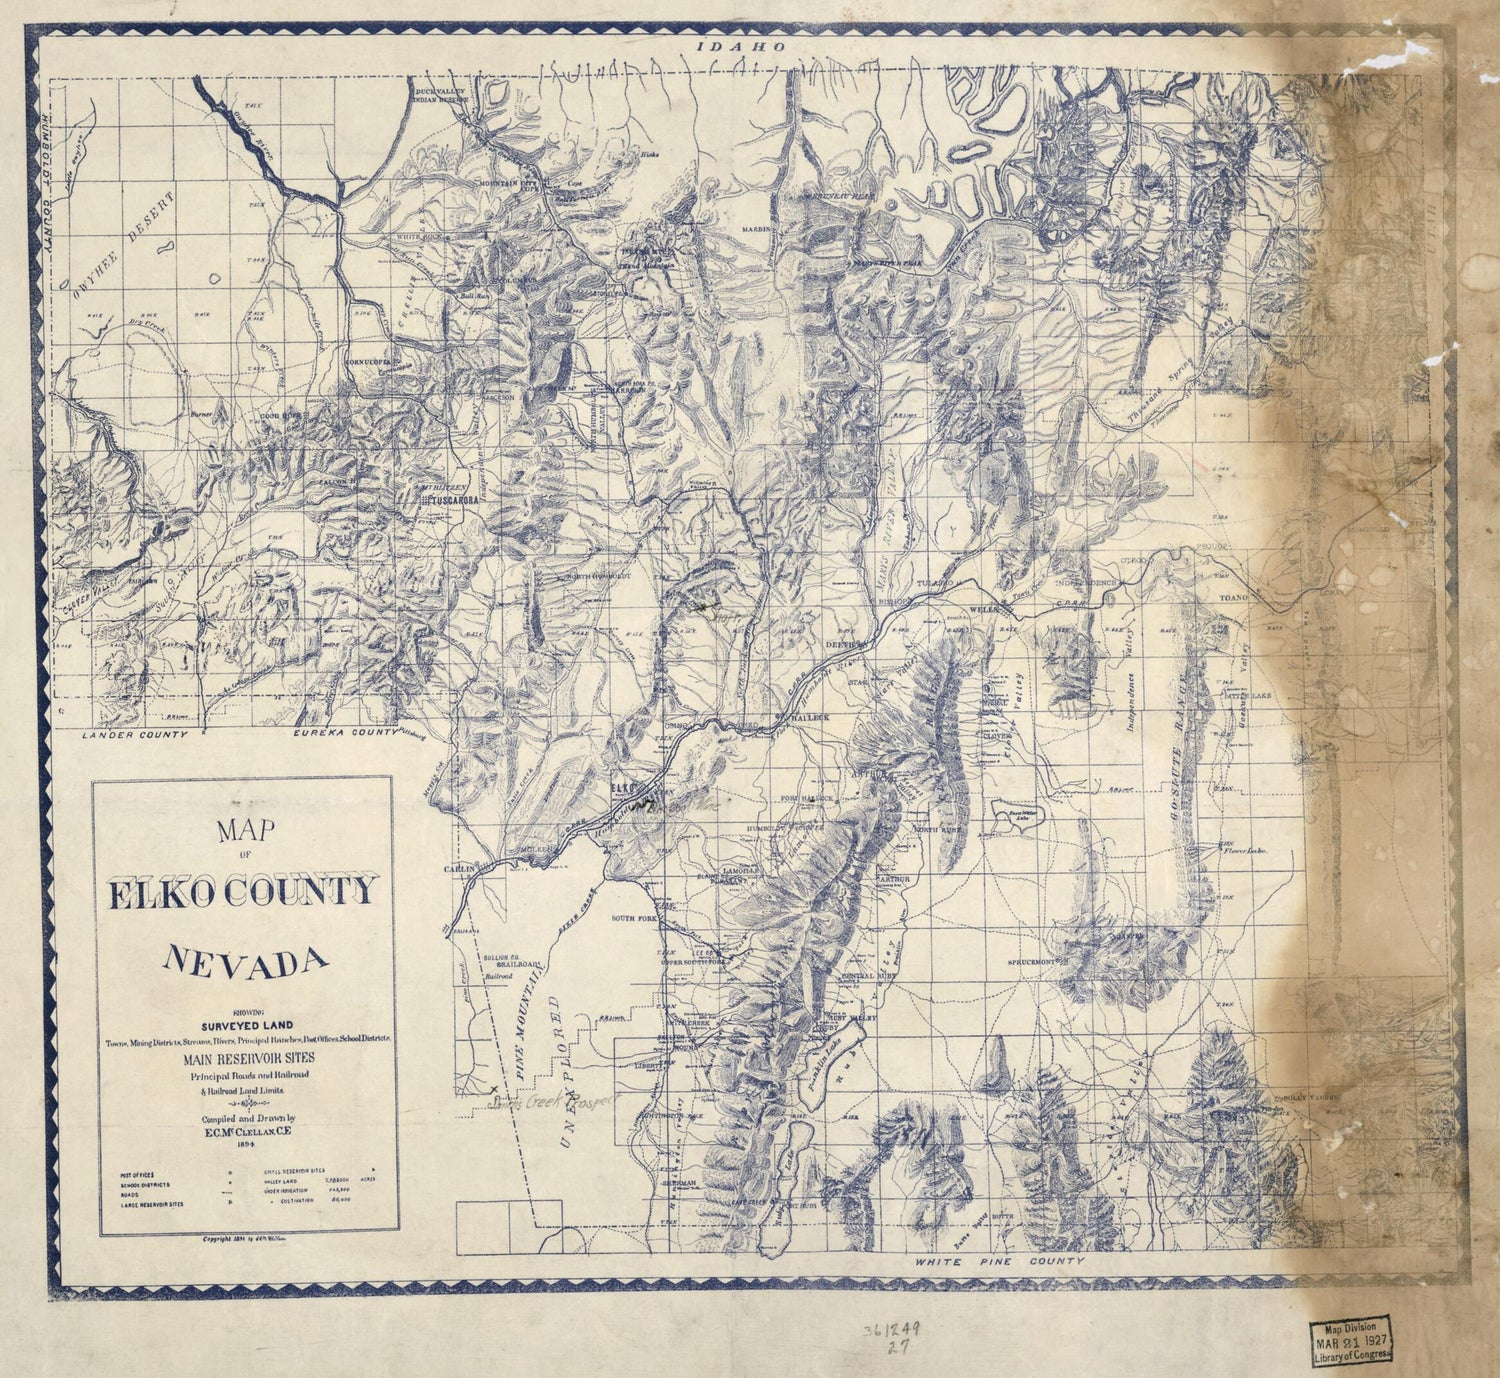 This old map of Map of Elko County, Nevada : Showing: Surveyed Land, Towns, Mining Districts, Streams, Rivers, Principal Ranches, Post Offices, School Districts, Main Reservoir Sites, Principal Roads and Railroad &amp; Railroad Land Limits from 1894 was crea